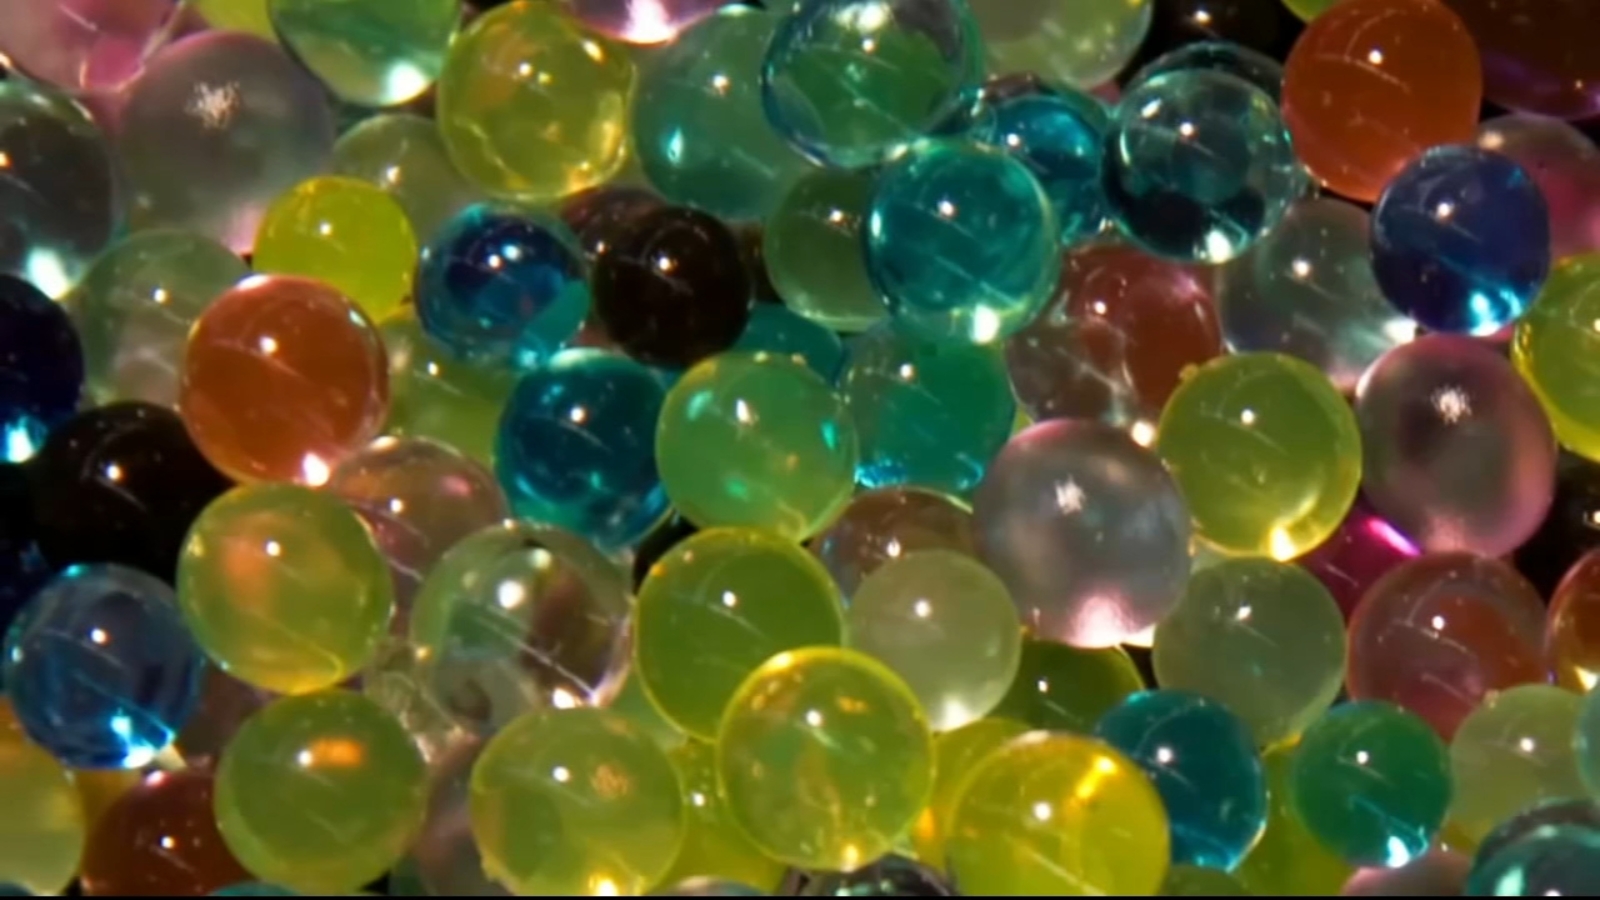 NorthamptonCounty mom Stacey Gonzalez warns others about water beads after 11-year-old son swallows one [Video]